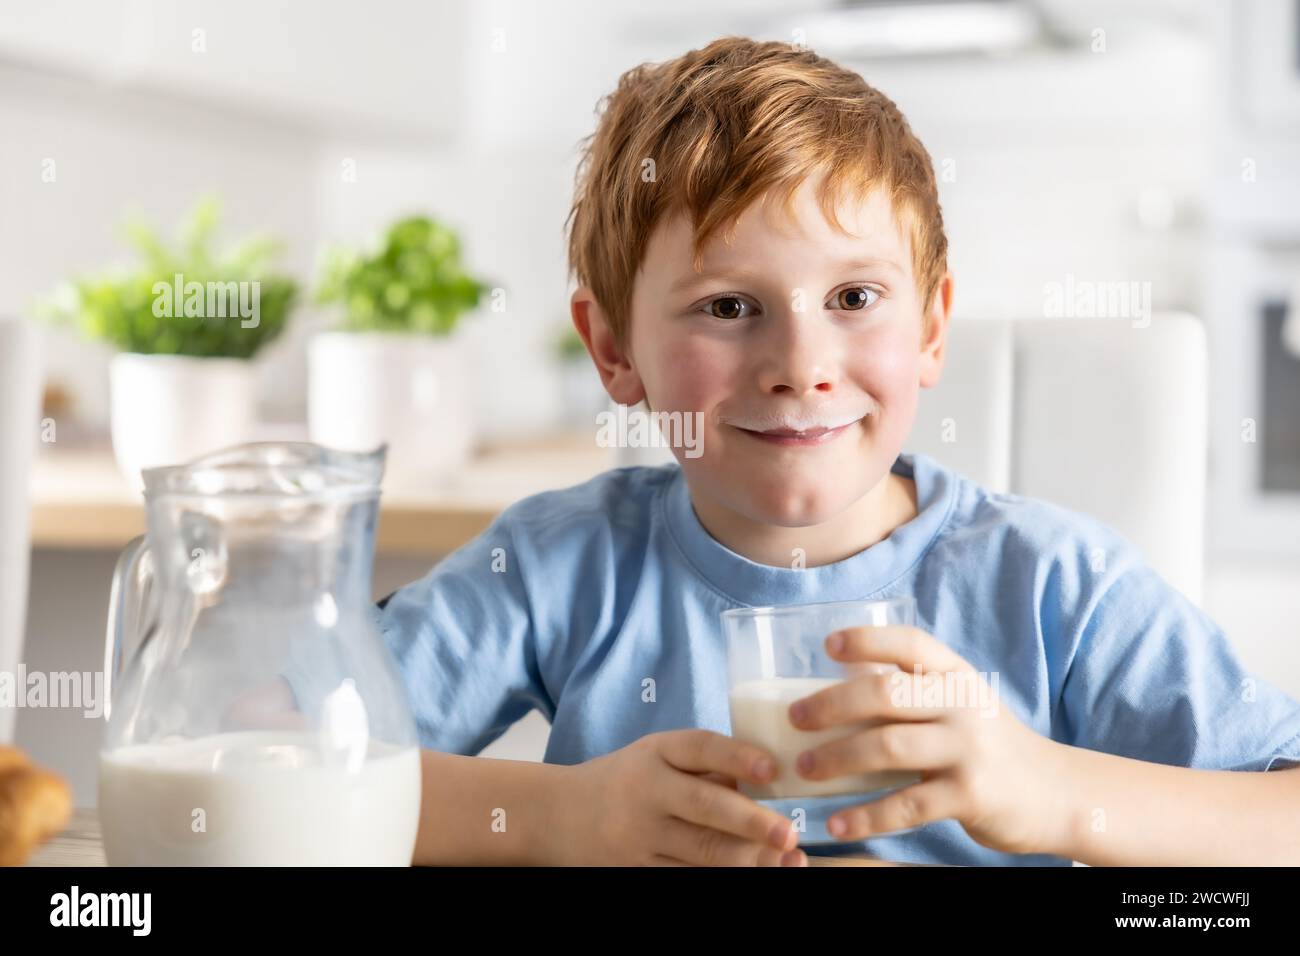 Portrait of a little boy who drank milk and has a mustache from him. Stock Photo